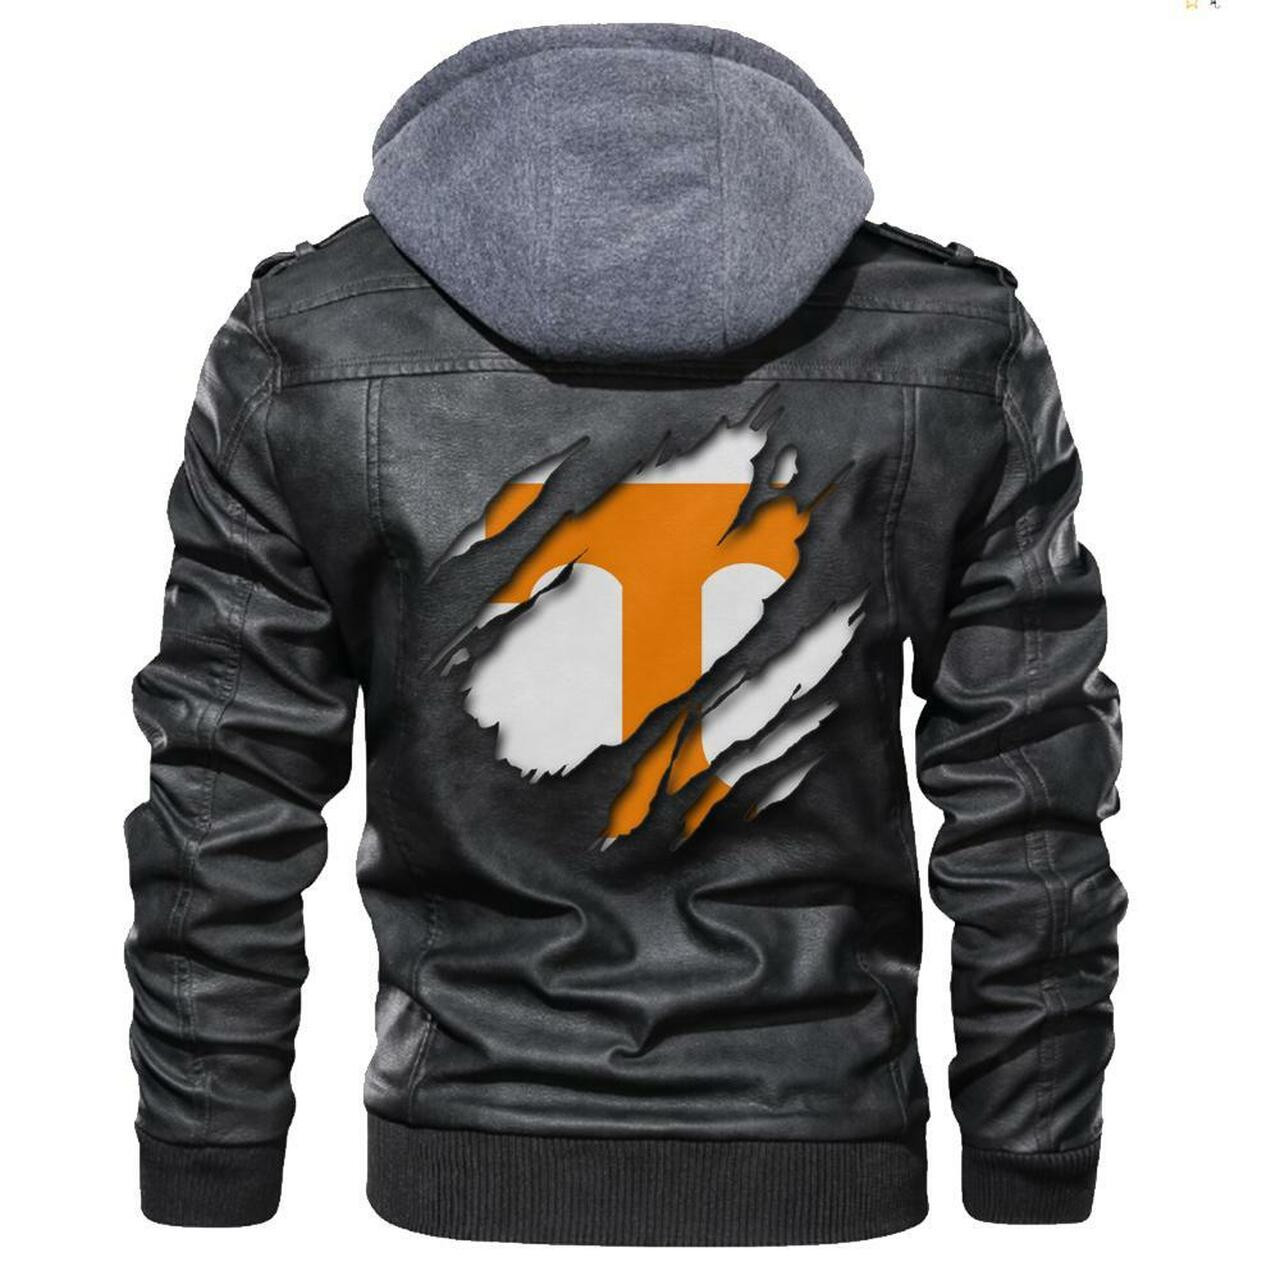 This leather Jacket will look great on you and make you stand out from the crowd 101